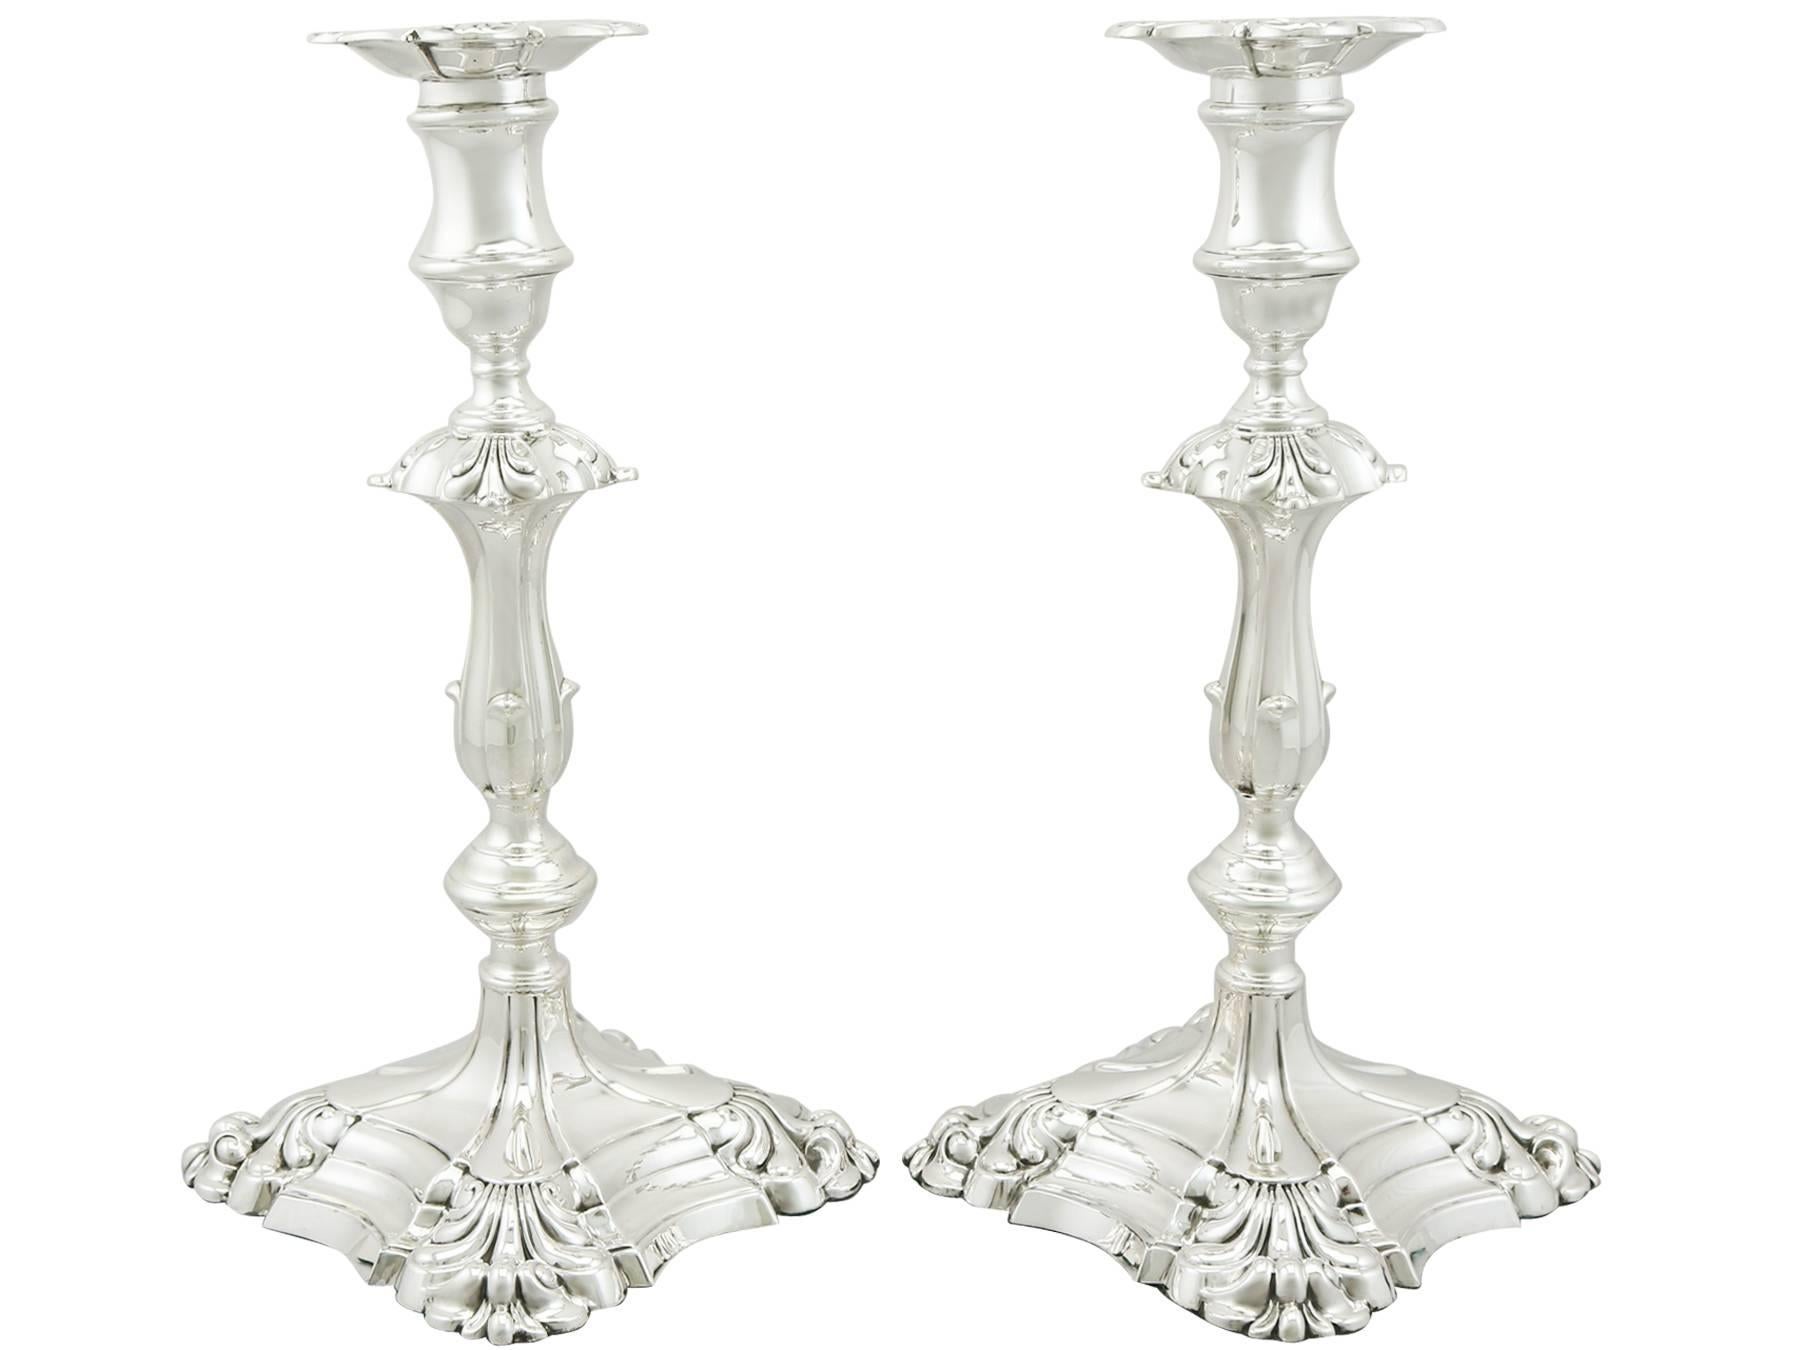 An exceptional, fine and impressive, large pair of antique George V English sterling silver candlesticks; an addition of our ornamental Georgian silverware collection.

These exceptional antique George V, large sterling silver candlesticks have a